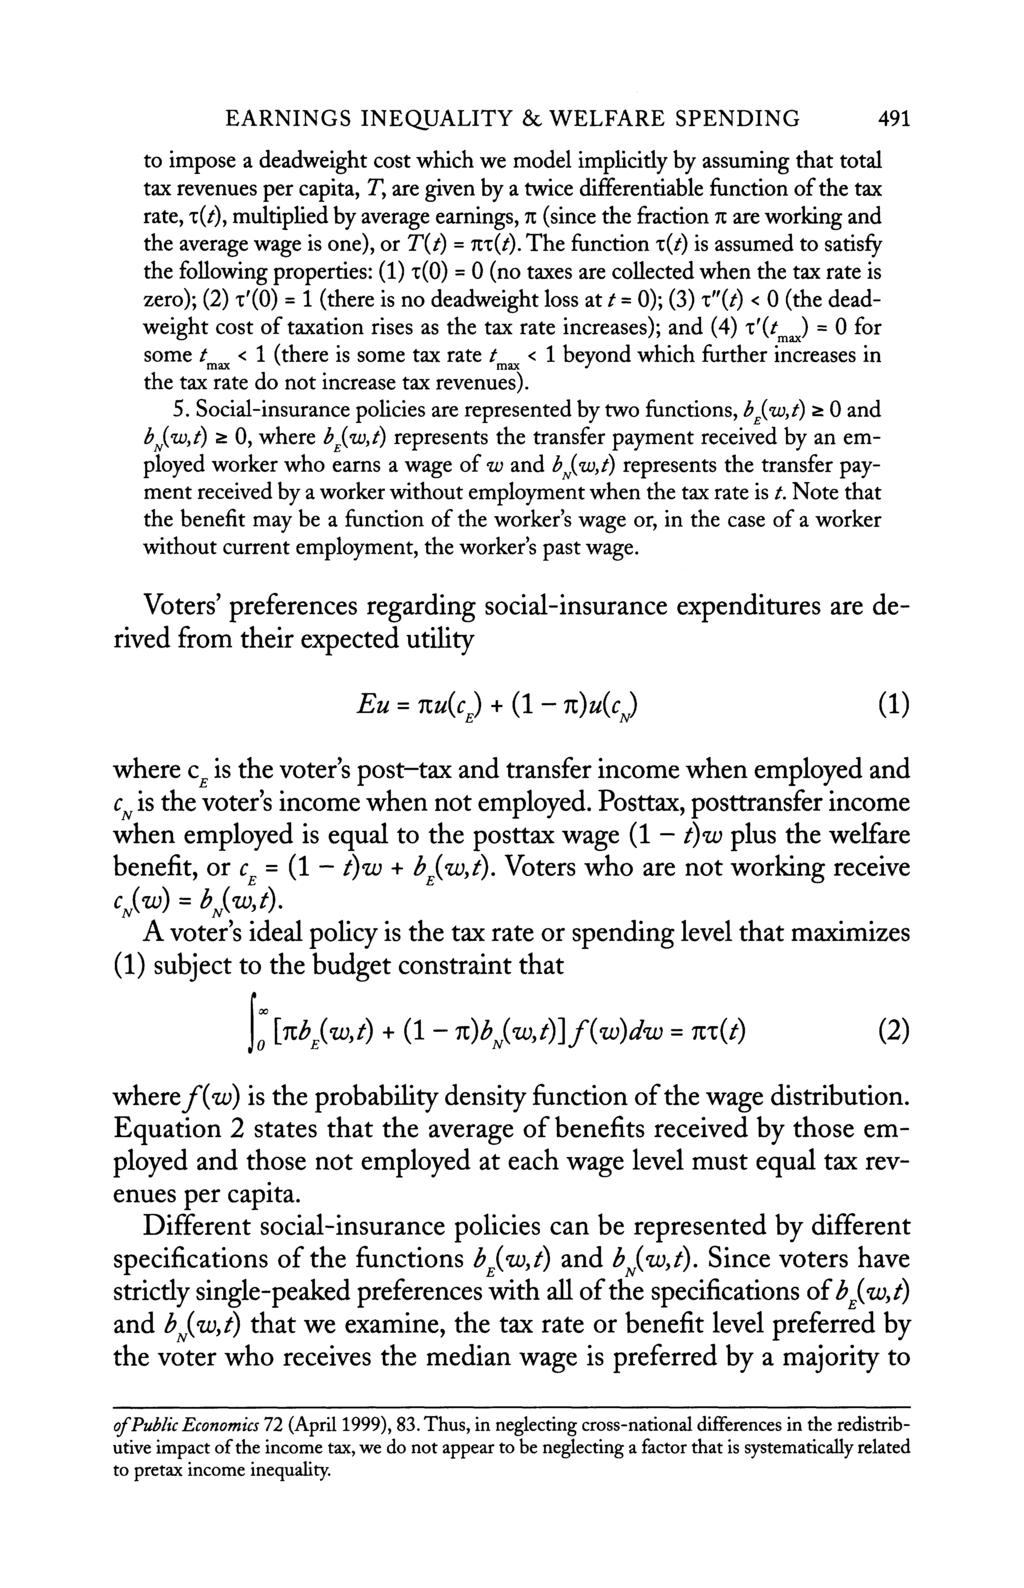 EARNINGS INEQUALITY & WELFARE SPENDING 491 impose a deadweight cost which we model implicitly assumg tal tax revenues per capita, Ty are given a twice differentiable functi tax rate, x(/), multiplied